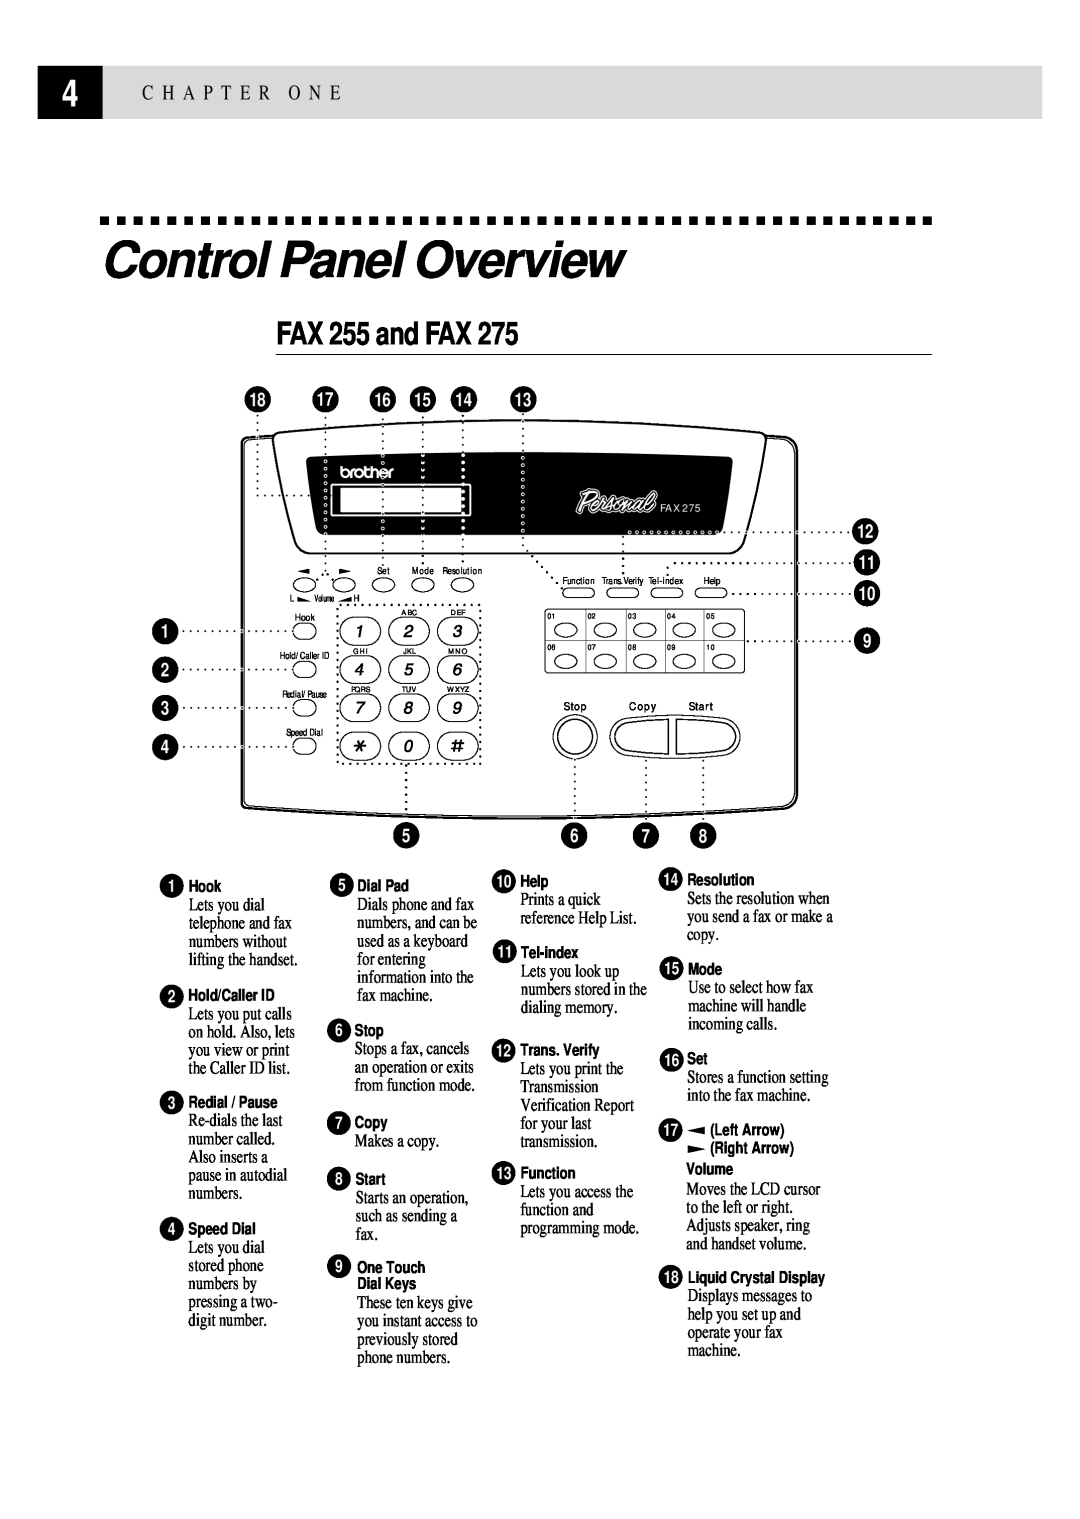 Brother owner manual Control Panel Overview, FAX 255 and FAX, Makes a copy 